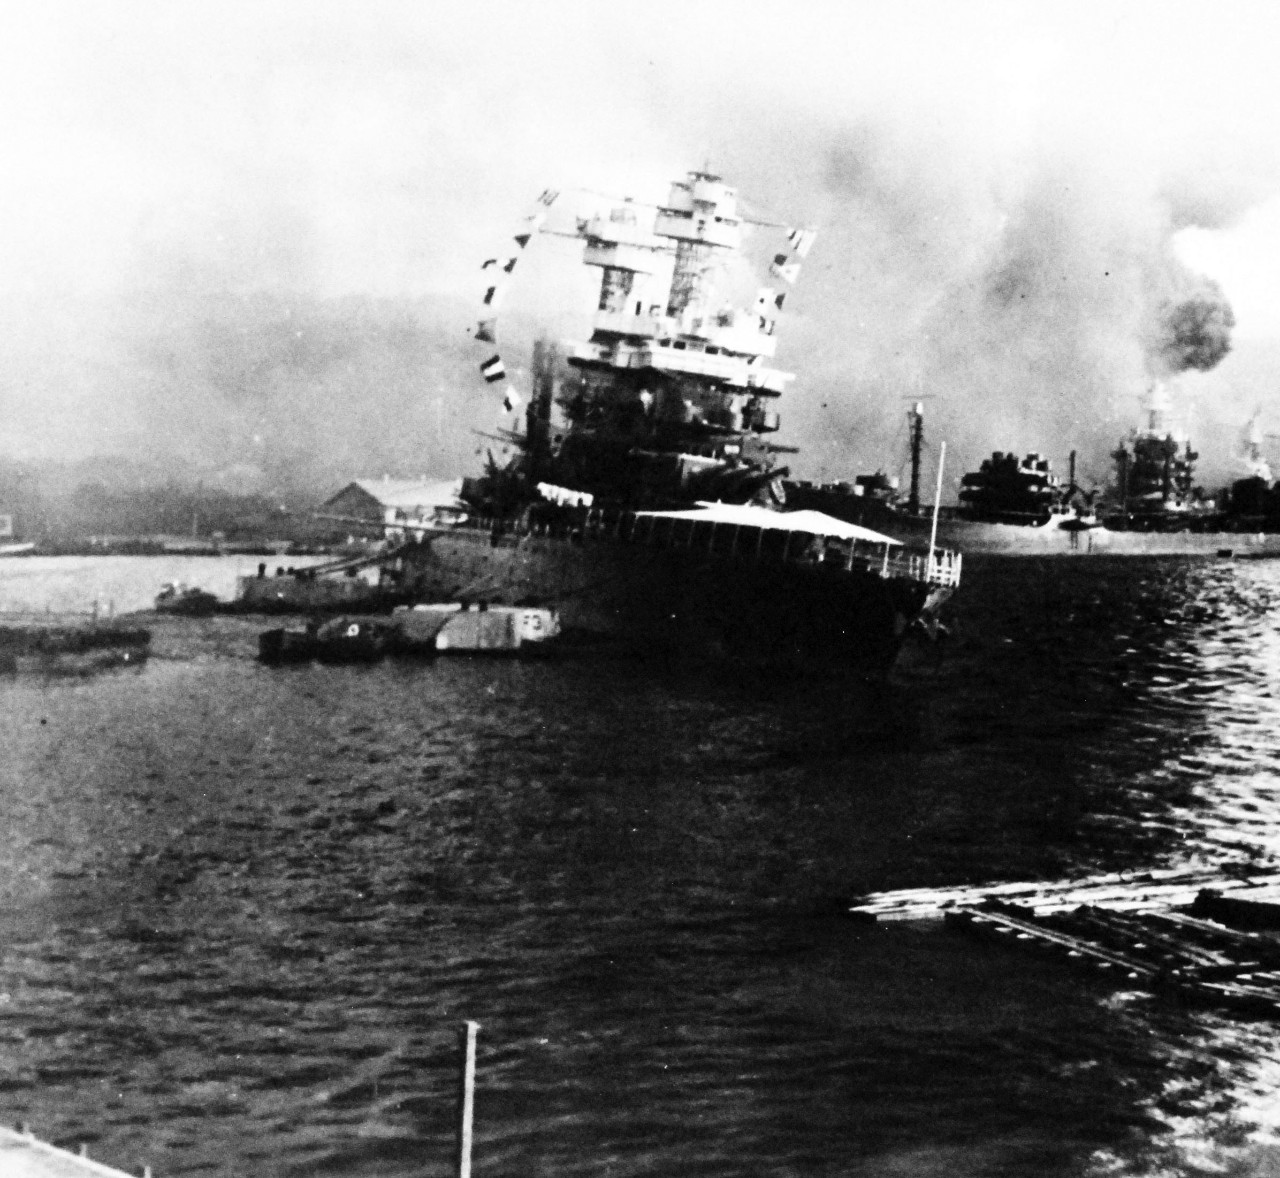 80-G-20047:   Japanese Attack on Pearl Harbor, Territory of Hawaii, December 7, 1941.   USS California (BB 44) is shown listing.  Official U.S. Navy Photograph, now in the collections of the National Archives. (4/7/2015).